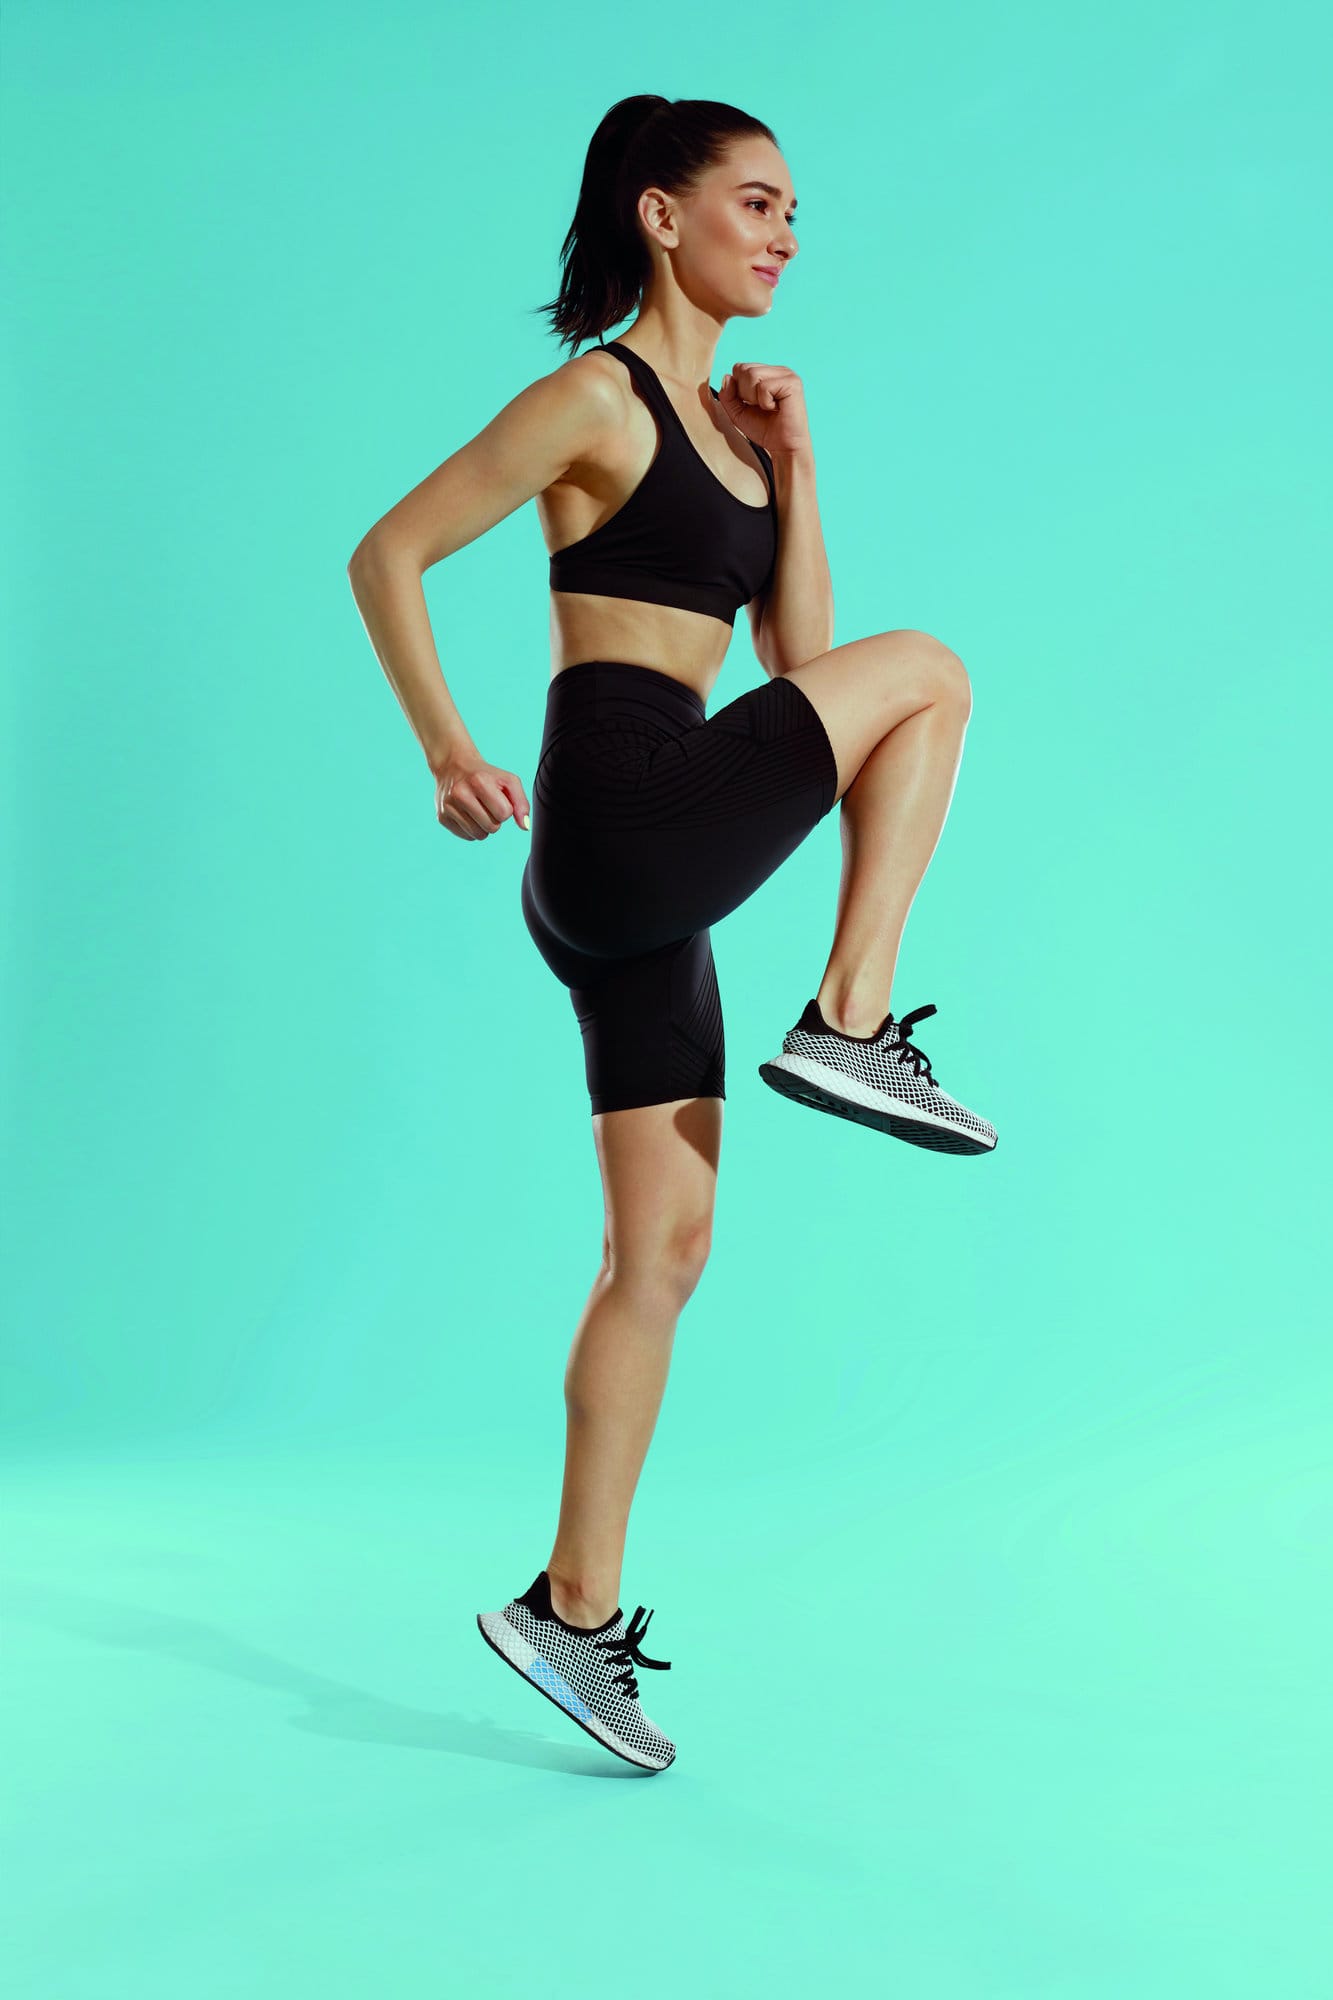 Fitness workout. Sport woman exercising, jumping on blue background. Full length portrait of sporty girl in black sportswear running on spot, warming up at studio